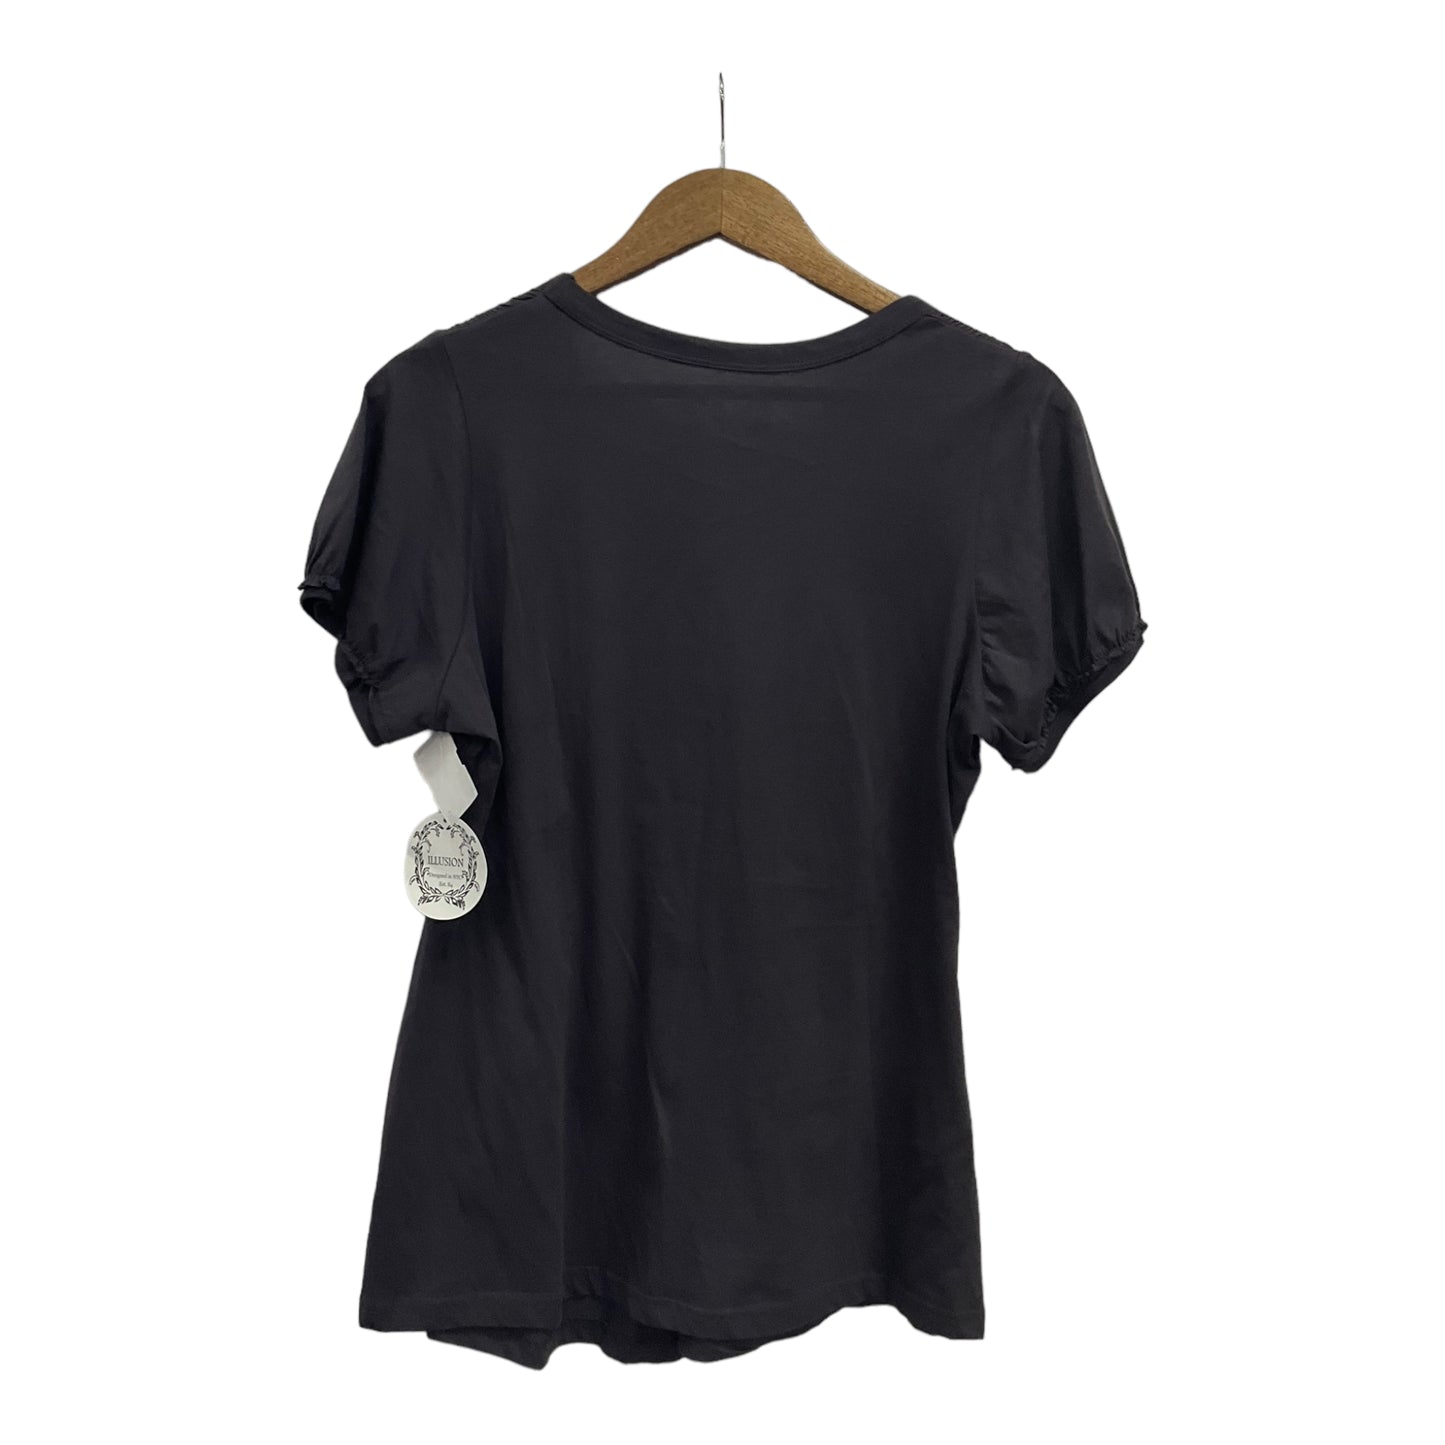 Top Short Sleeve Basic By Clothes Mentor  Size: 1x